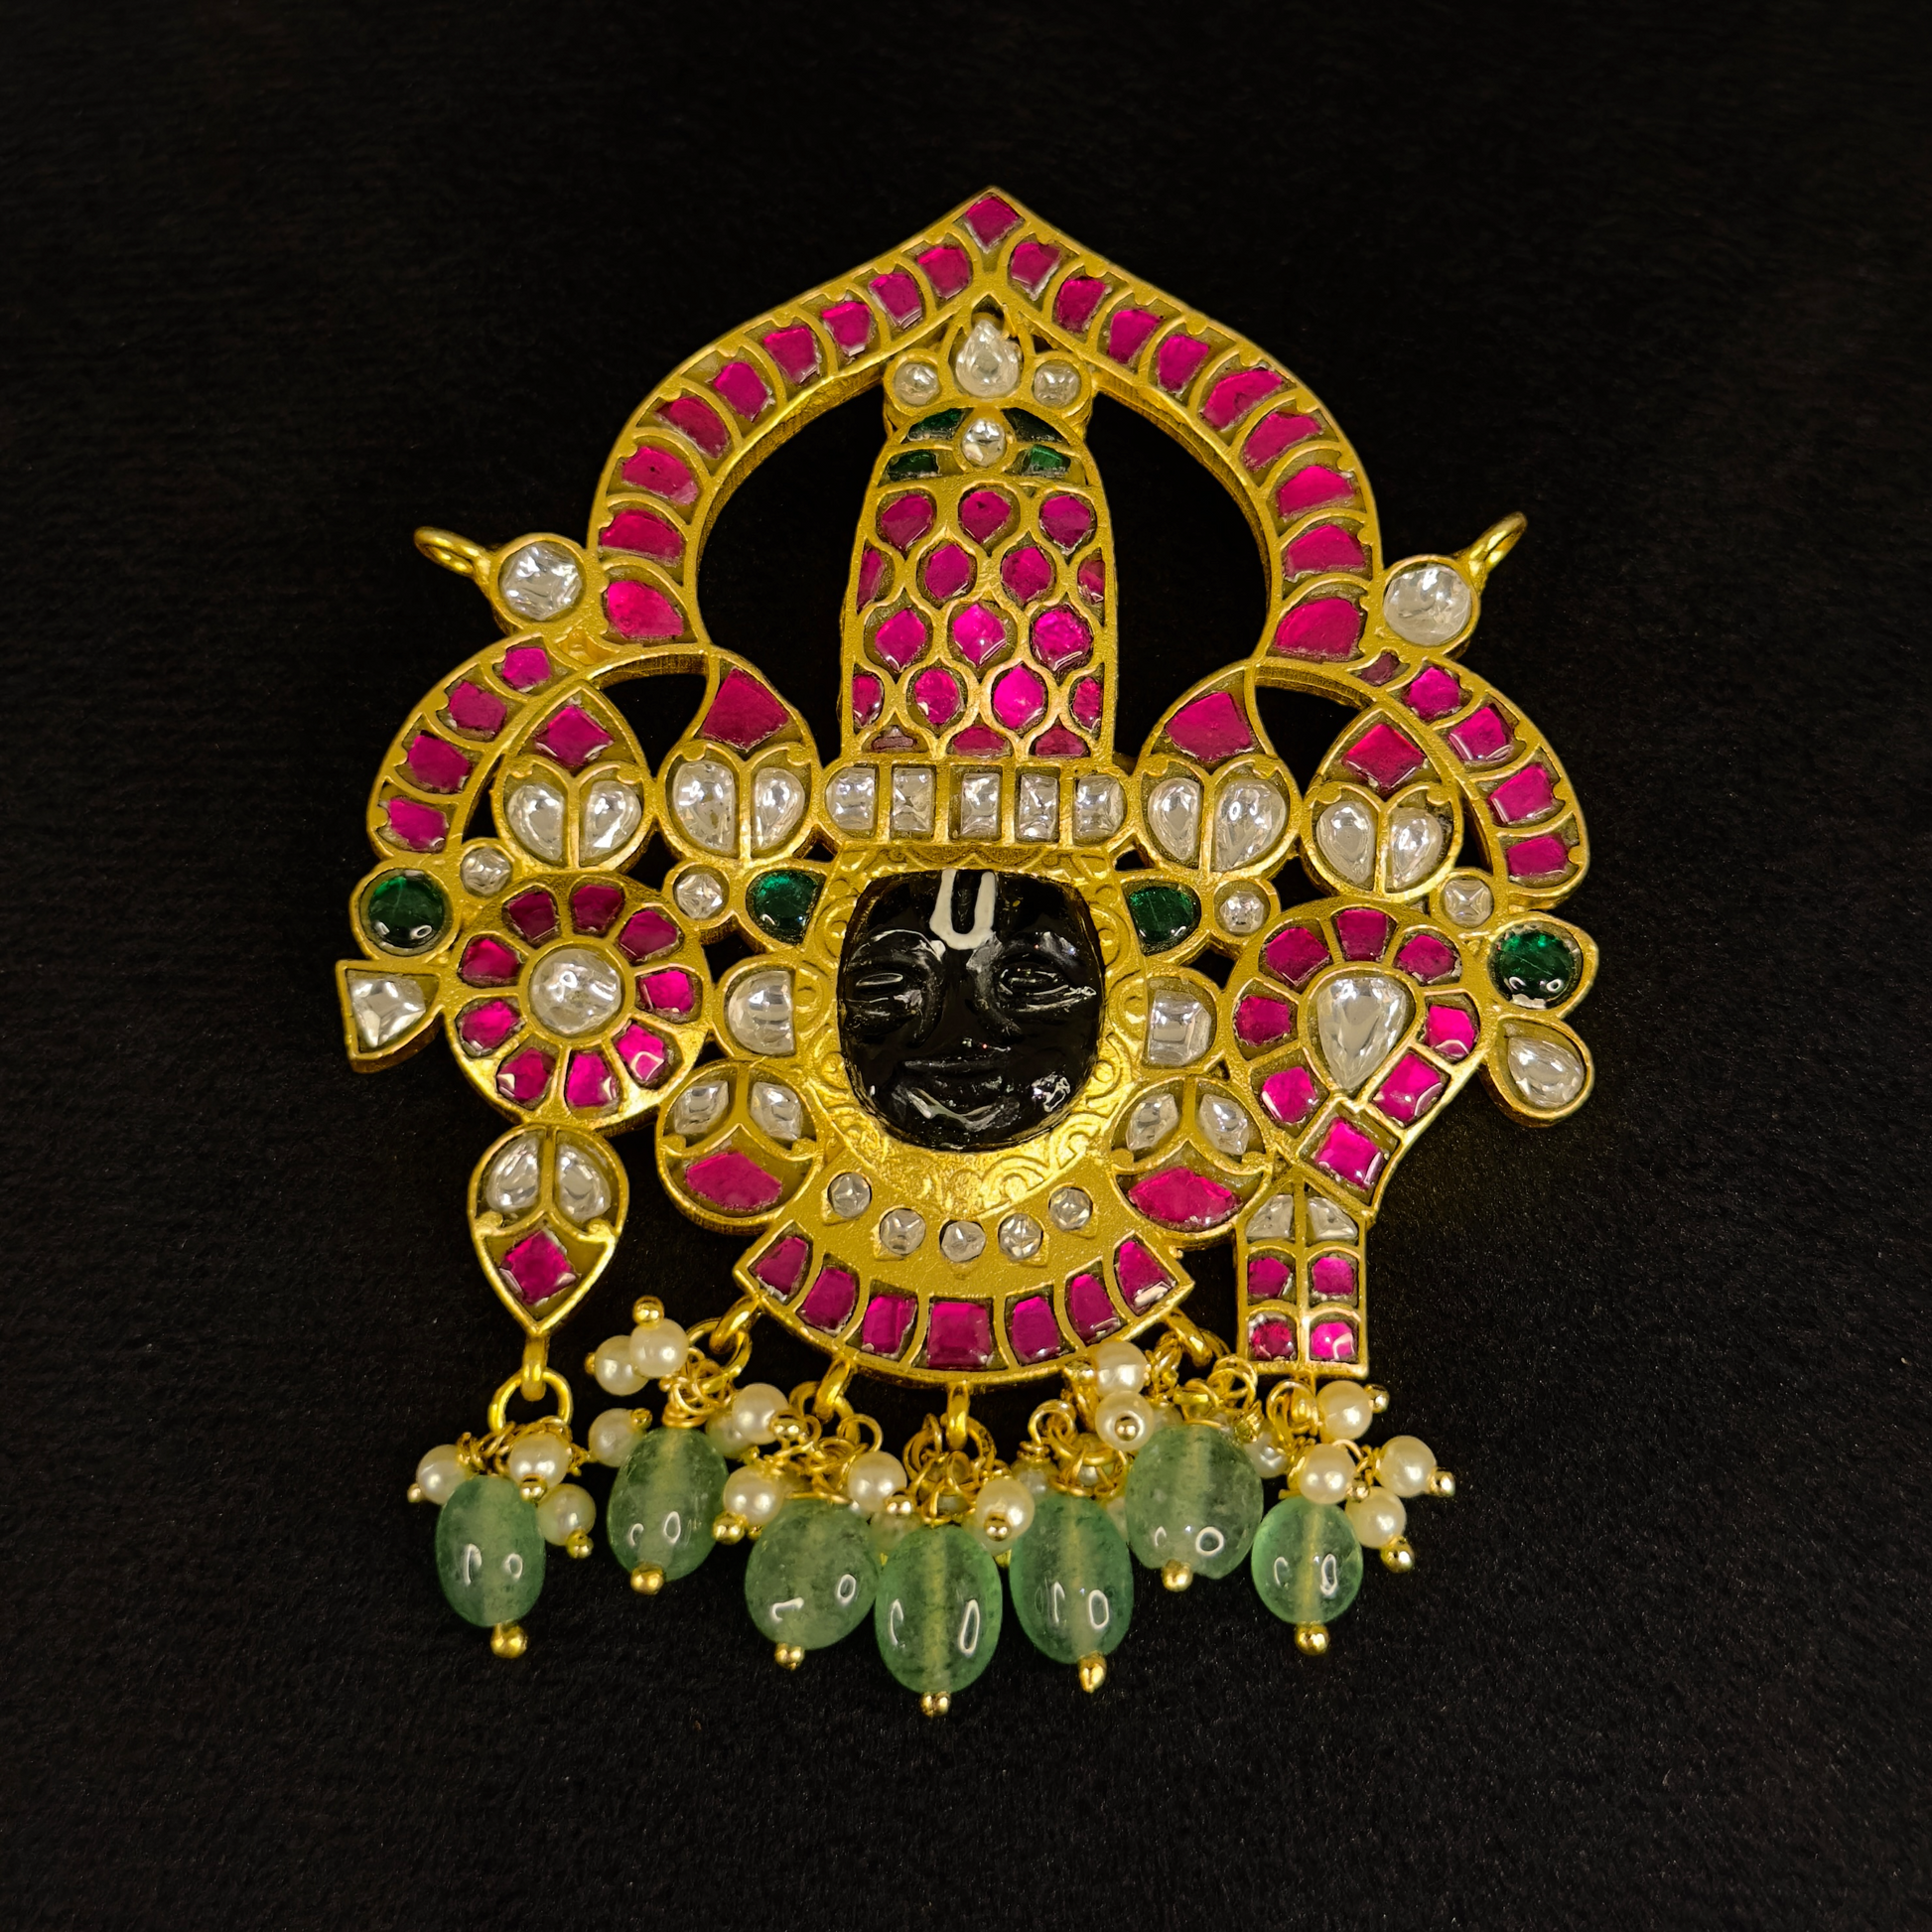 This is A Jadau Kundan pendant with Lord Balaji motif . This pendant is covered in 22k gold covering and at the bottom of the pendant there are Russian emeralds